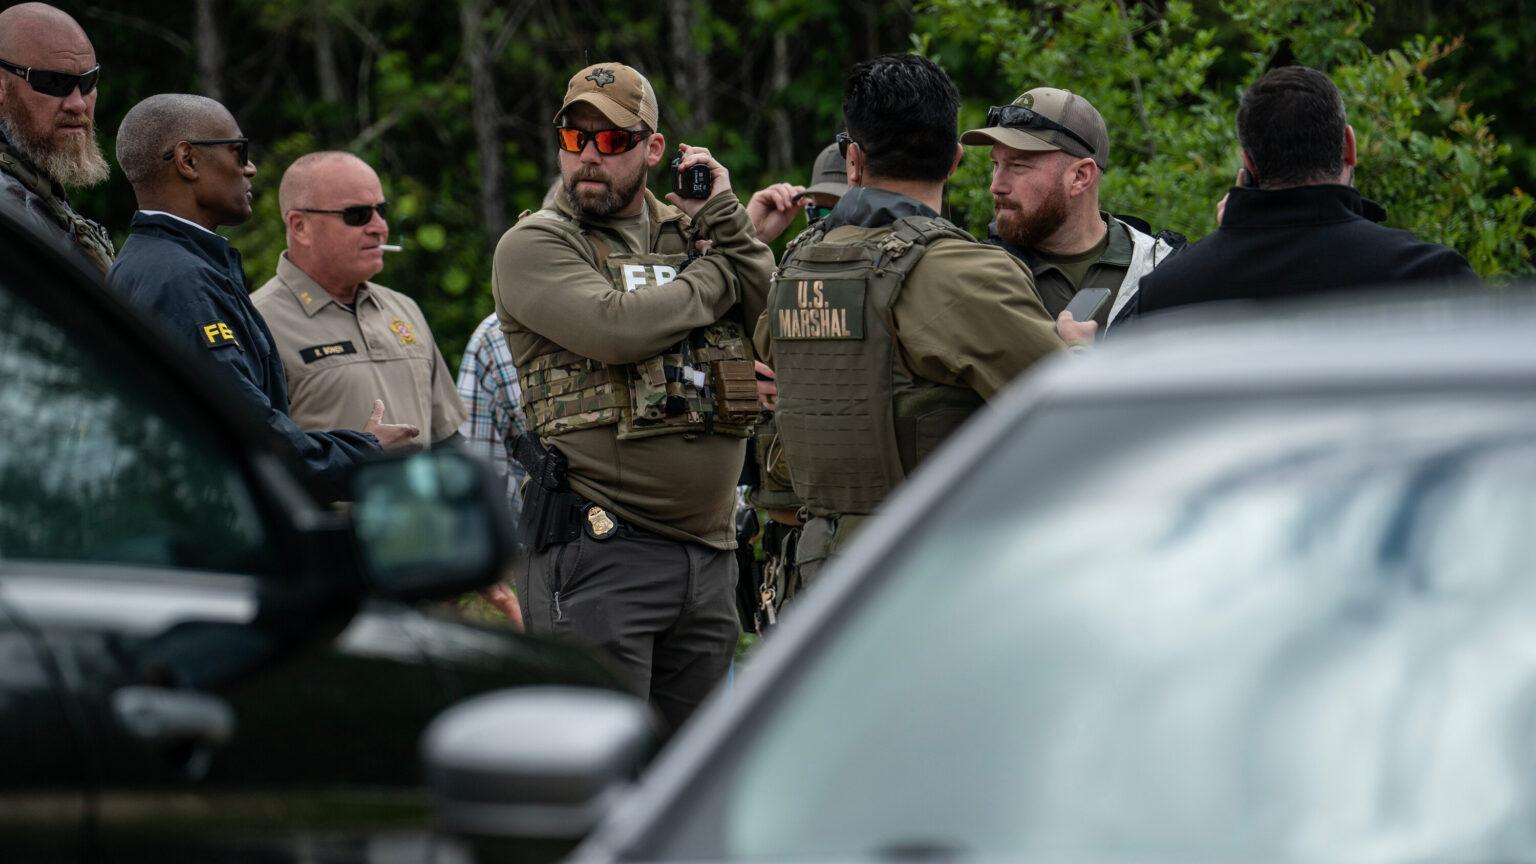 Suspected Texas shooter was kicked out of US Army